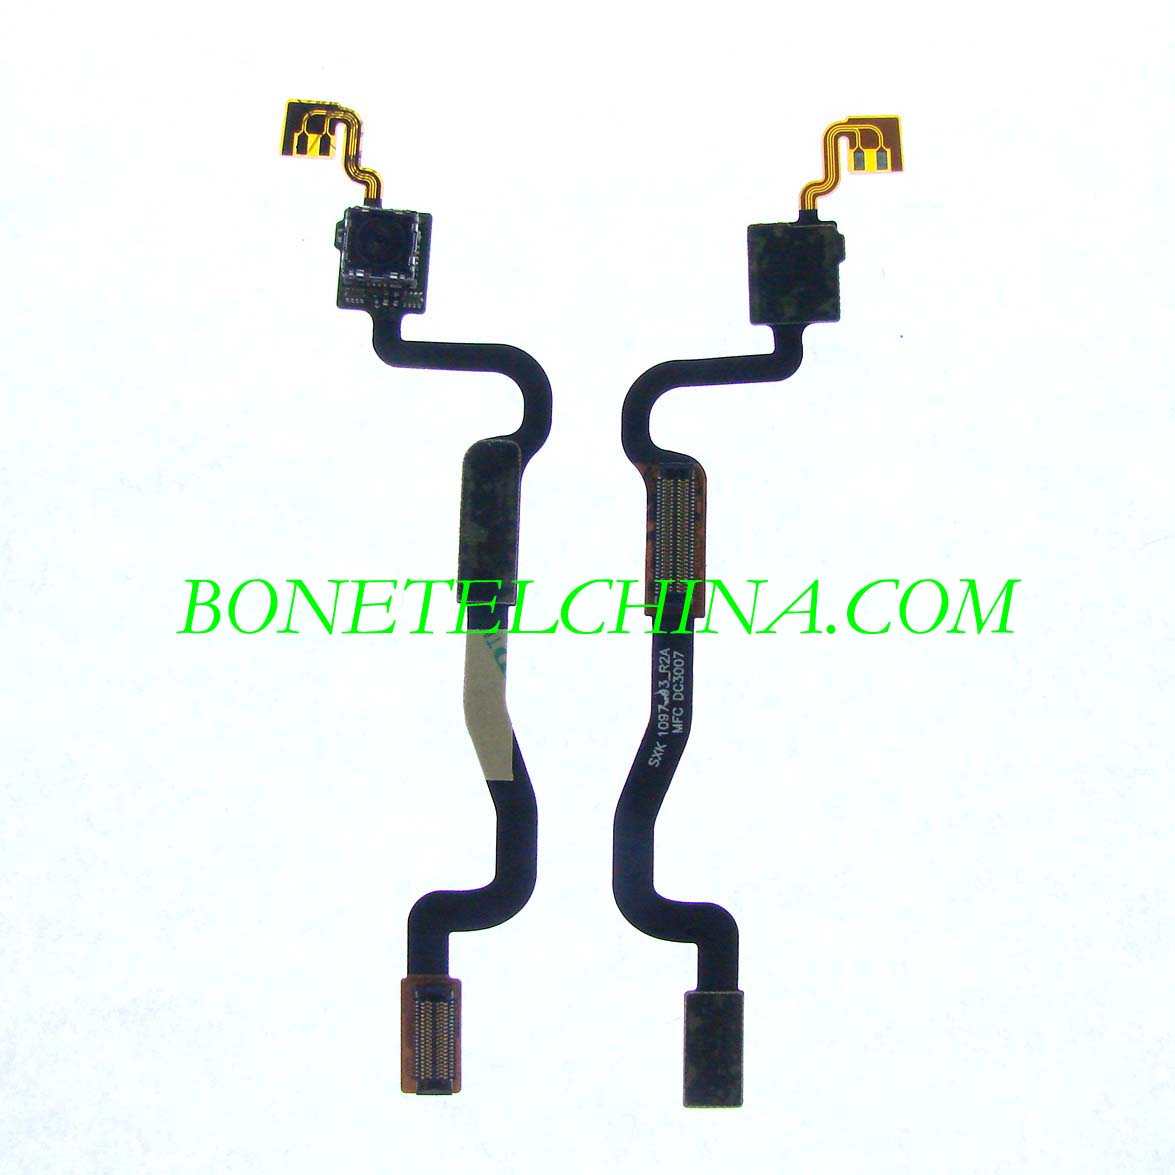 Z310 Mobile phone Flex Cables for Sony Ericsson